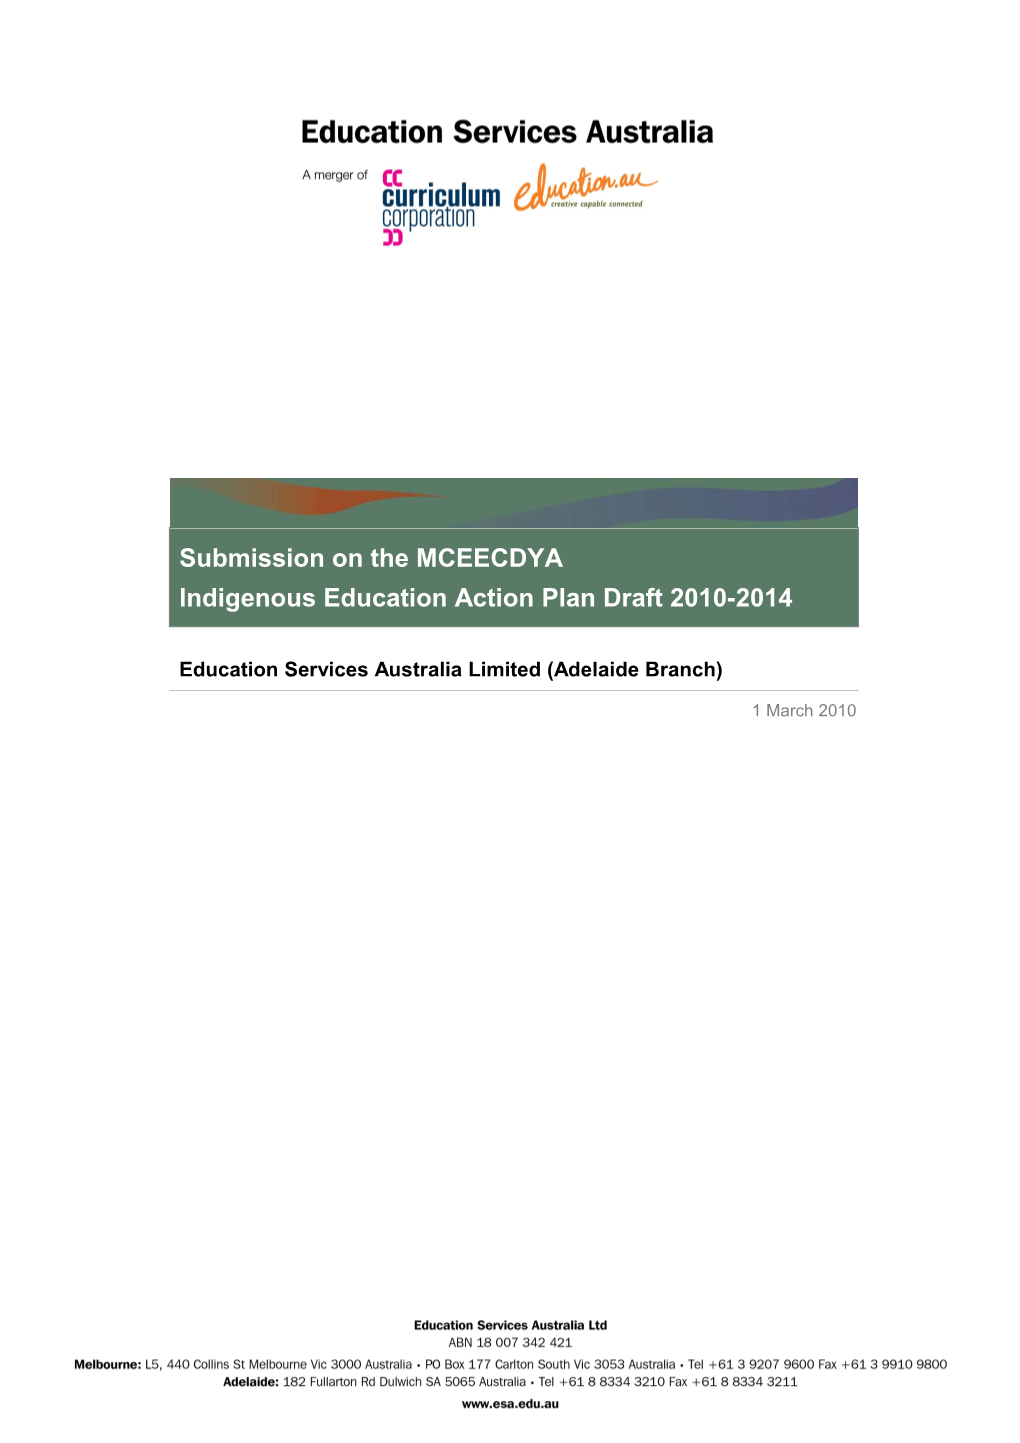 Education Services Australia Submission on MCEECDYA Draft Indigenous Education Action Plan